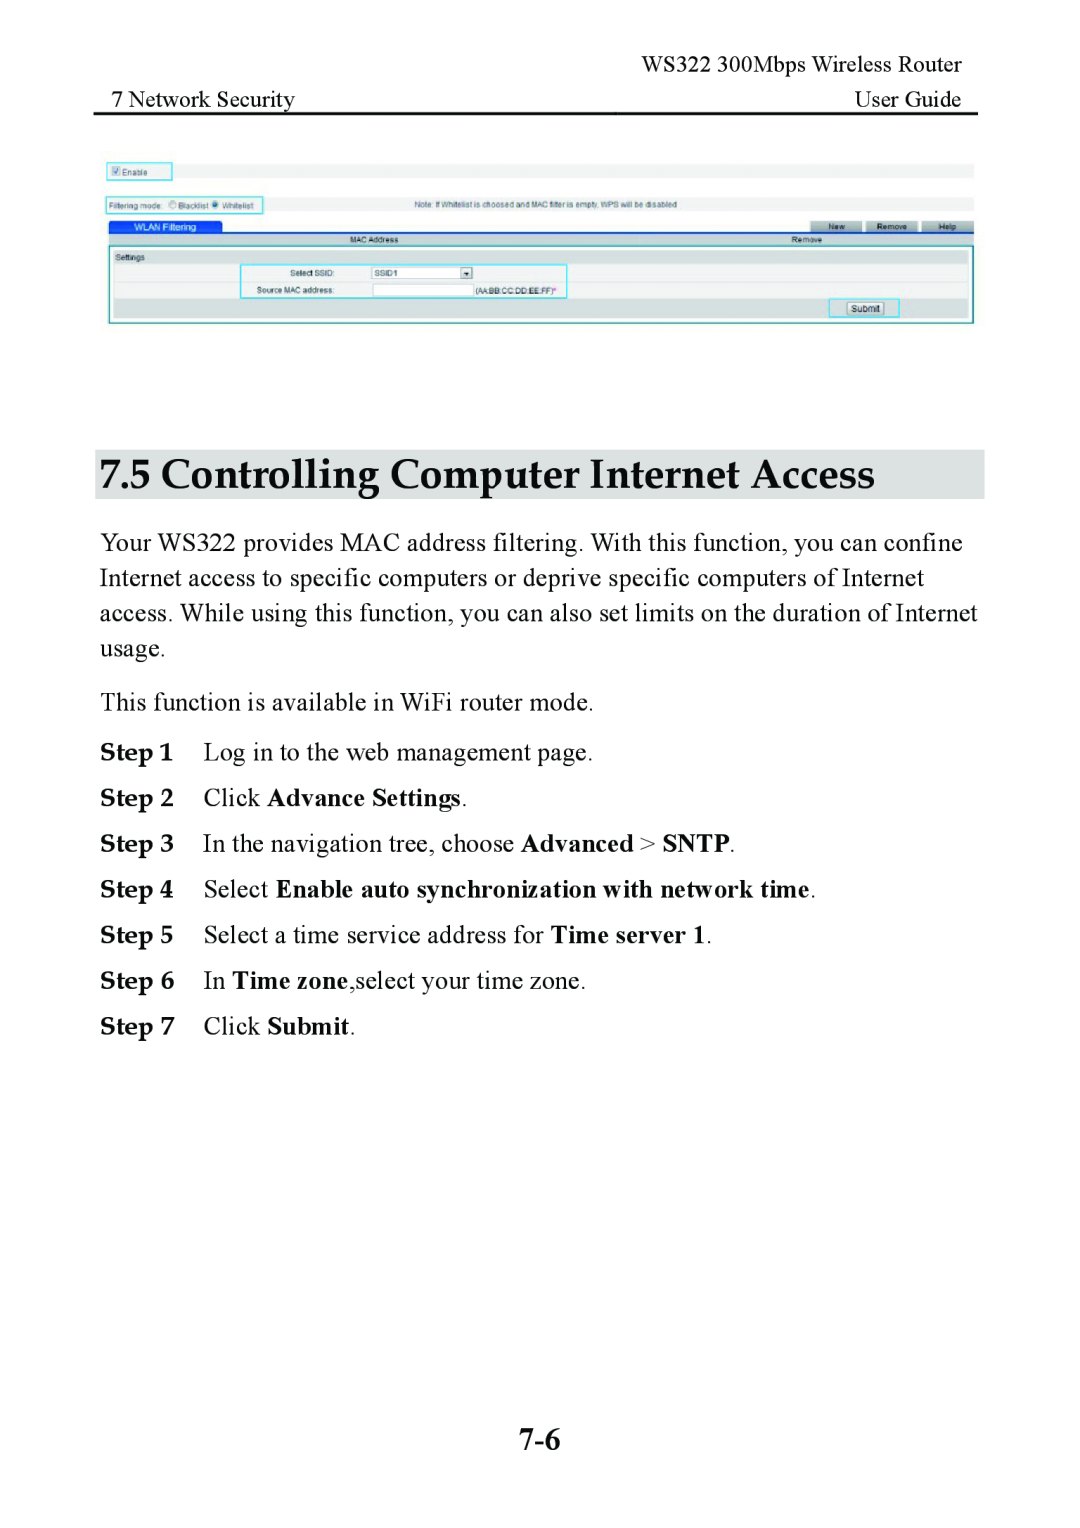 Huawei WS322 manual Controlling Computer Internet Access, Click Advance Settings, Click Submit 